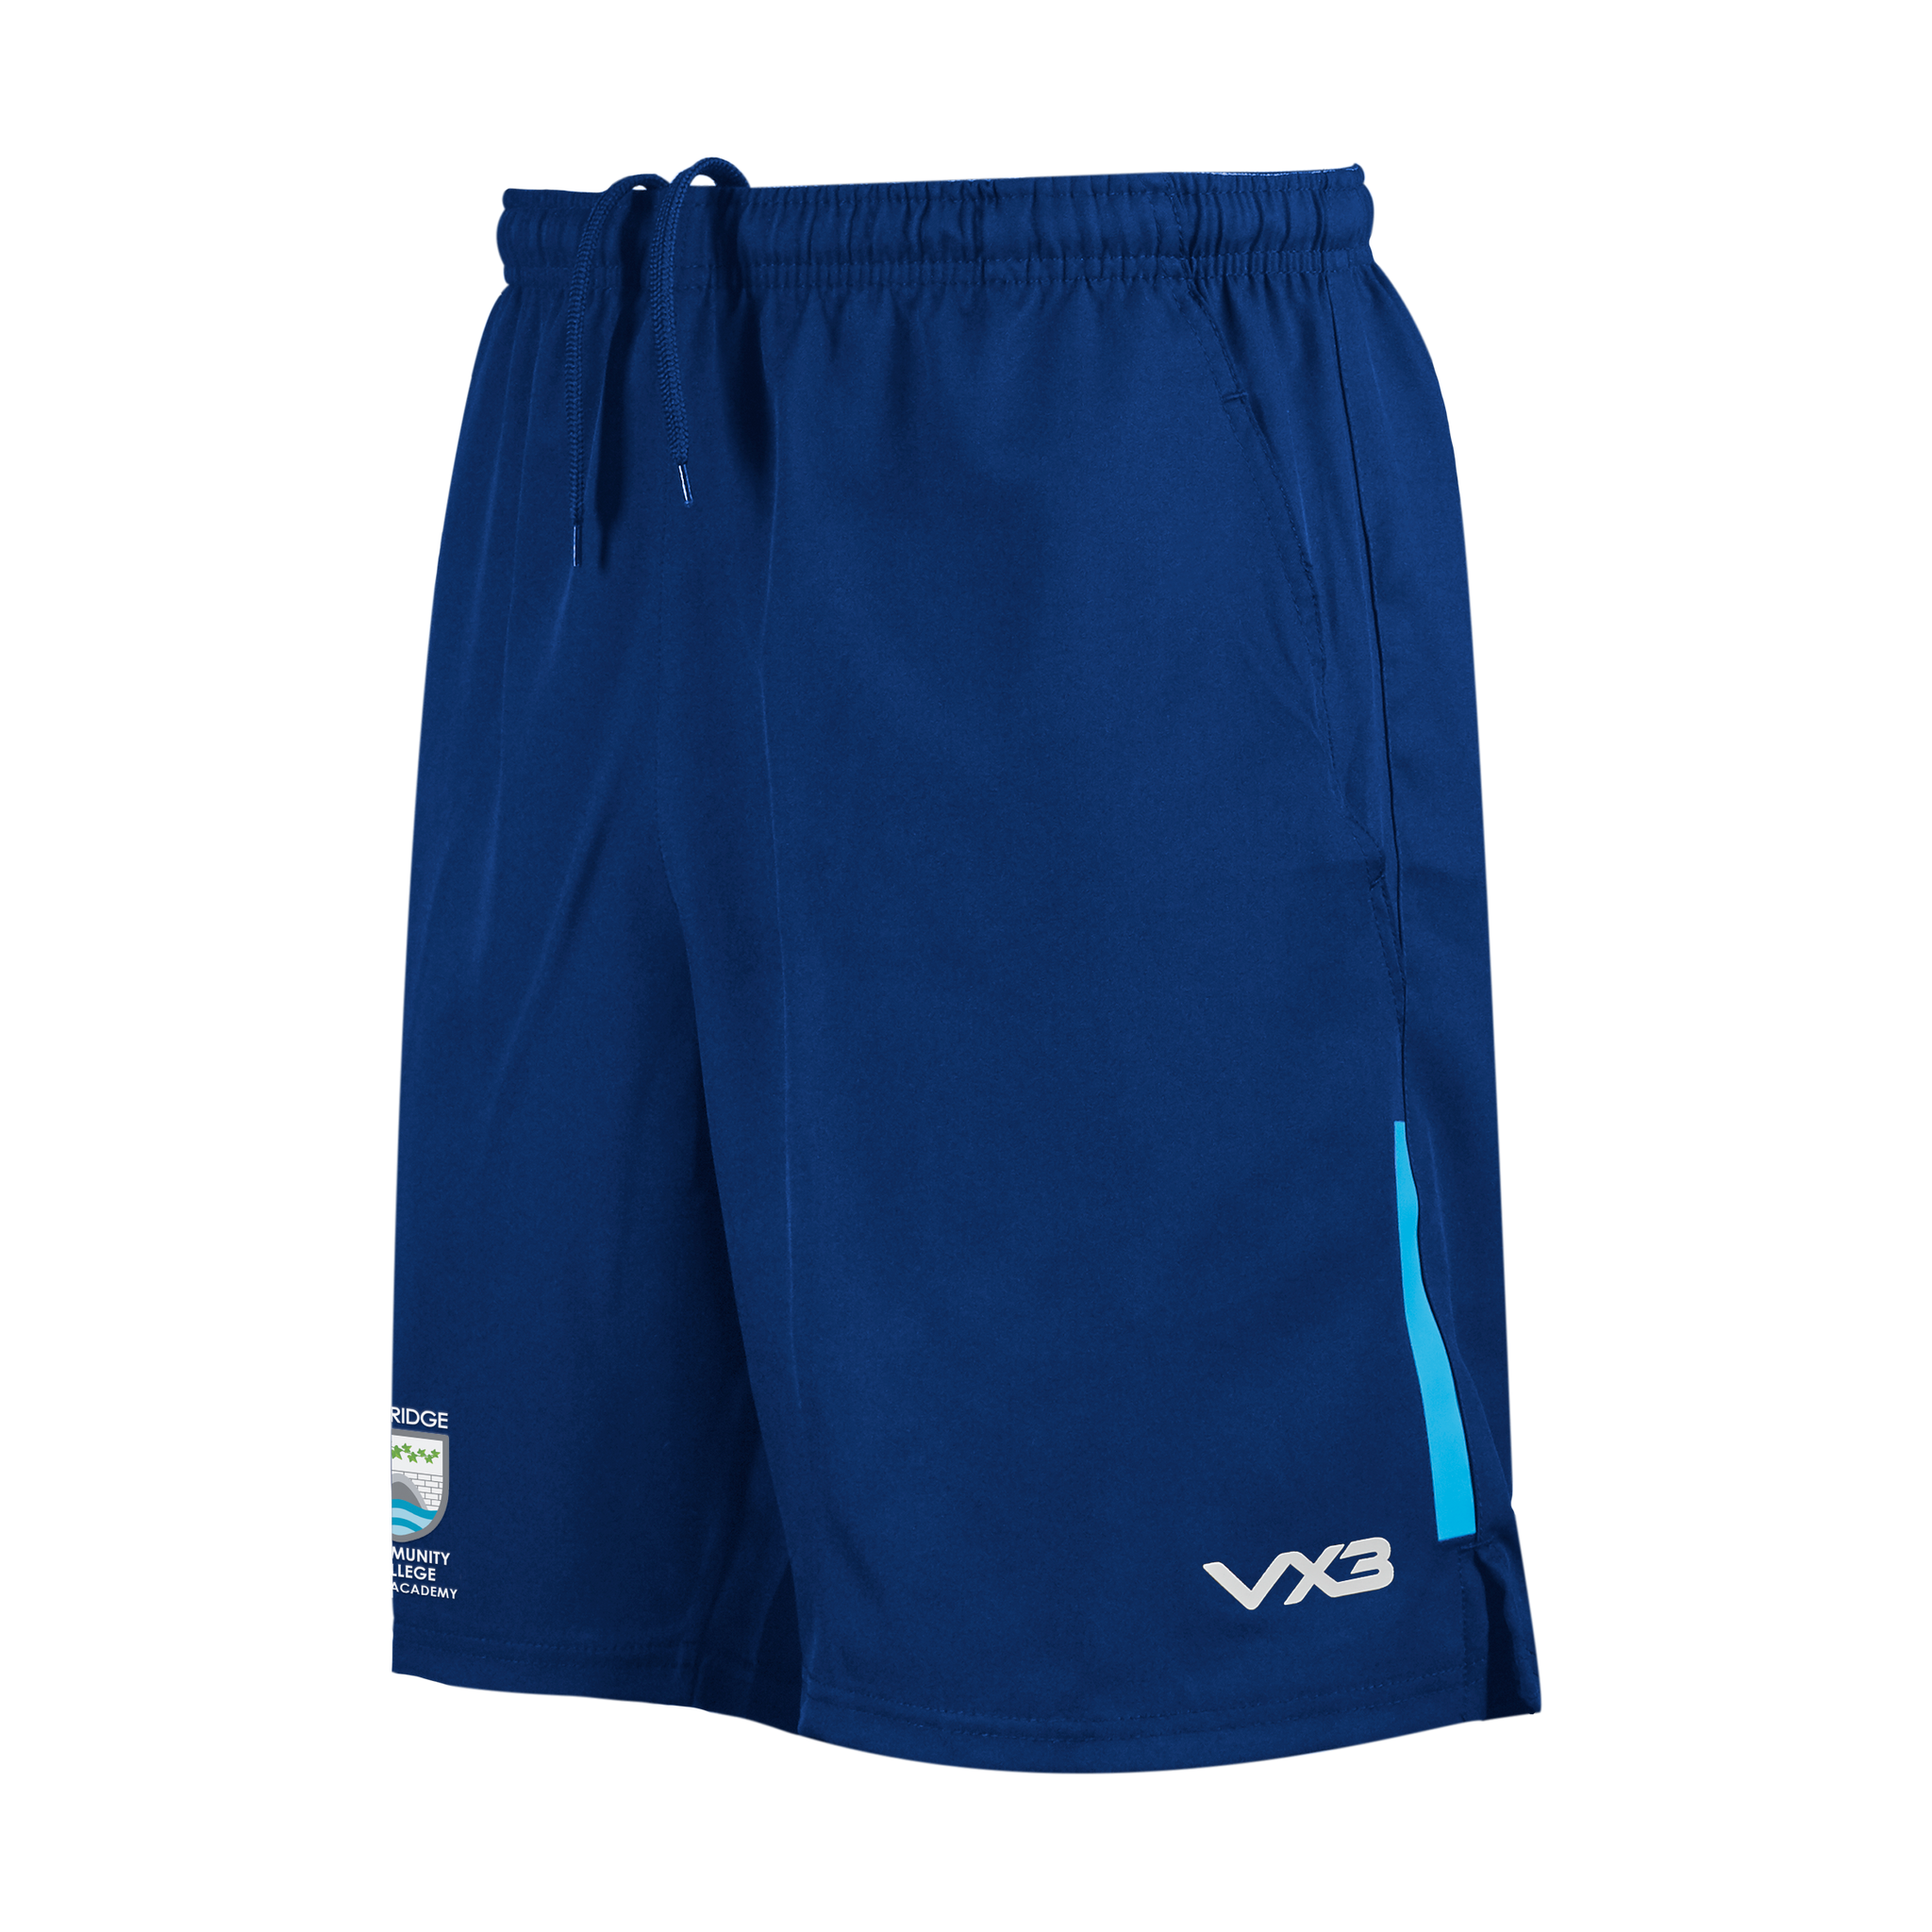 Ivybridge Community College - Rugby Academy Fortis Travel Shorts